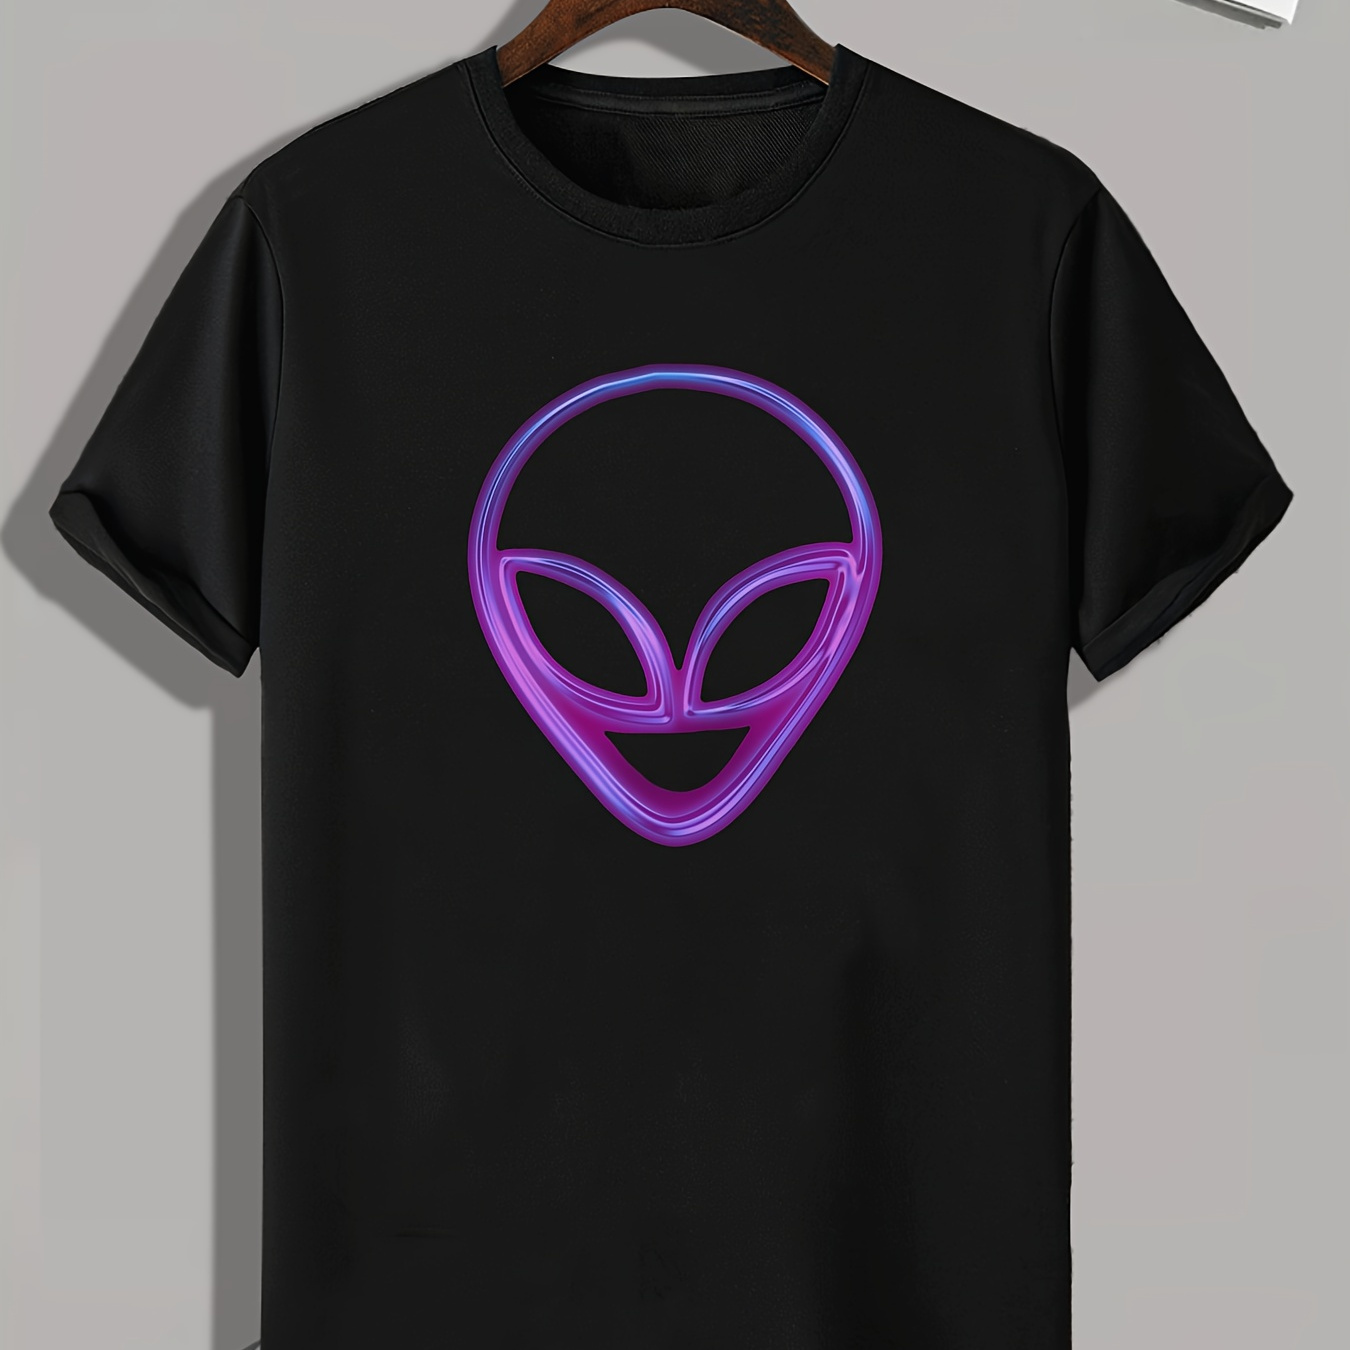 

Alien Print, Men's Graphic T-shirt, Casual Comfy Tees For Summer, Mens Clothing